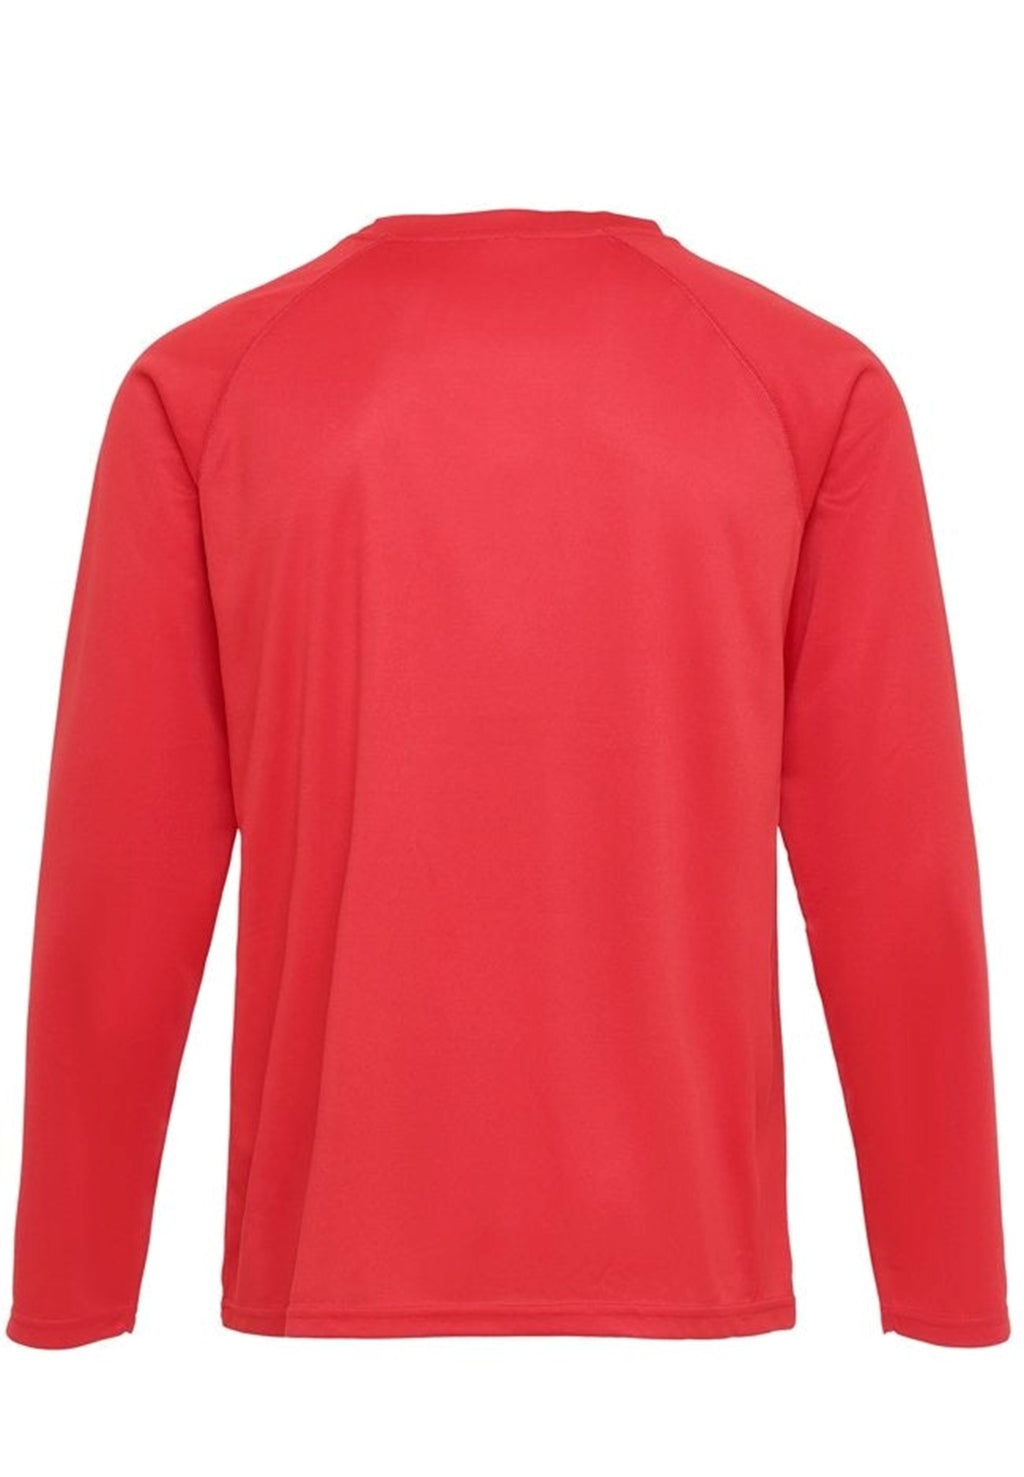 Long-sleeved Training T-shirt - Red